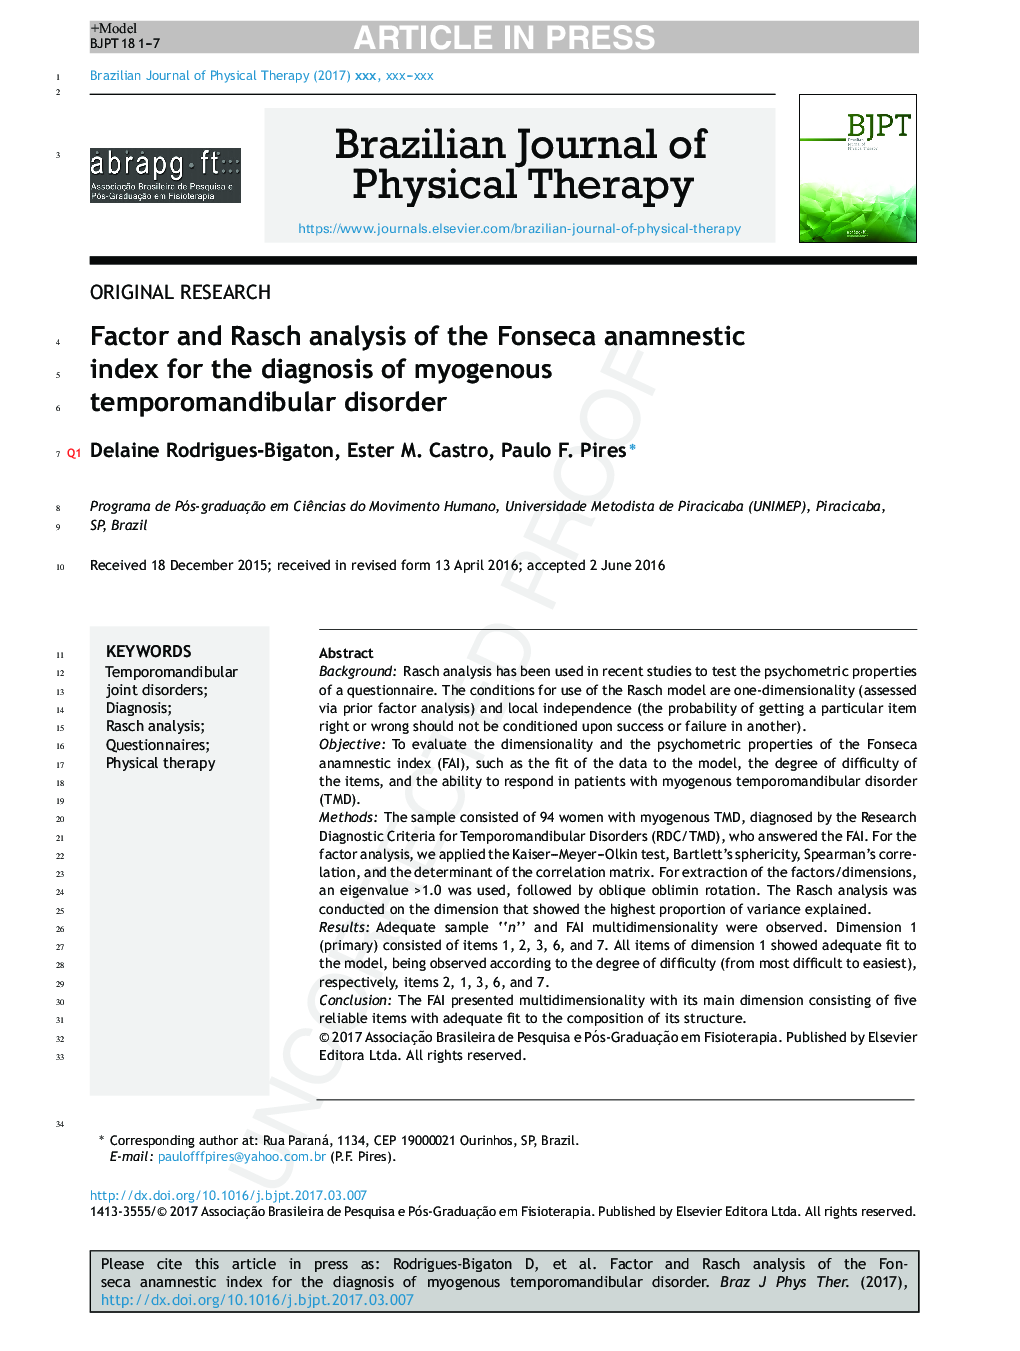 Factor and Rasch analysis of the Fonseca anamnestic index for the diagnosis of myogenous temporomandibular disorder